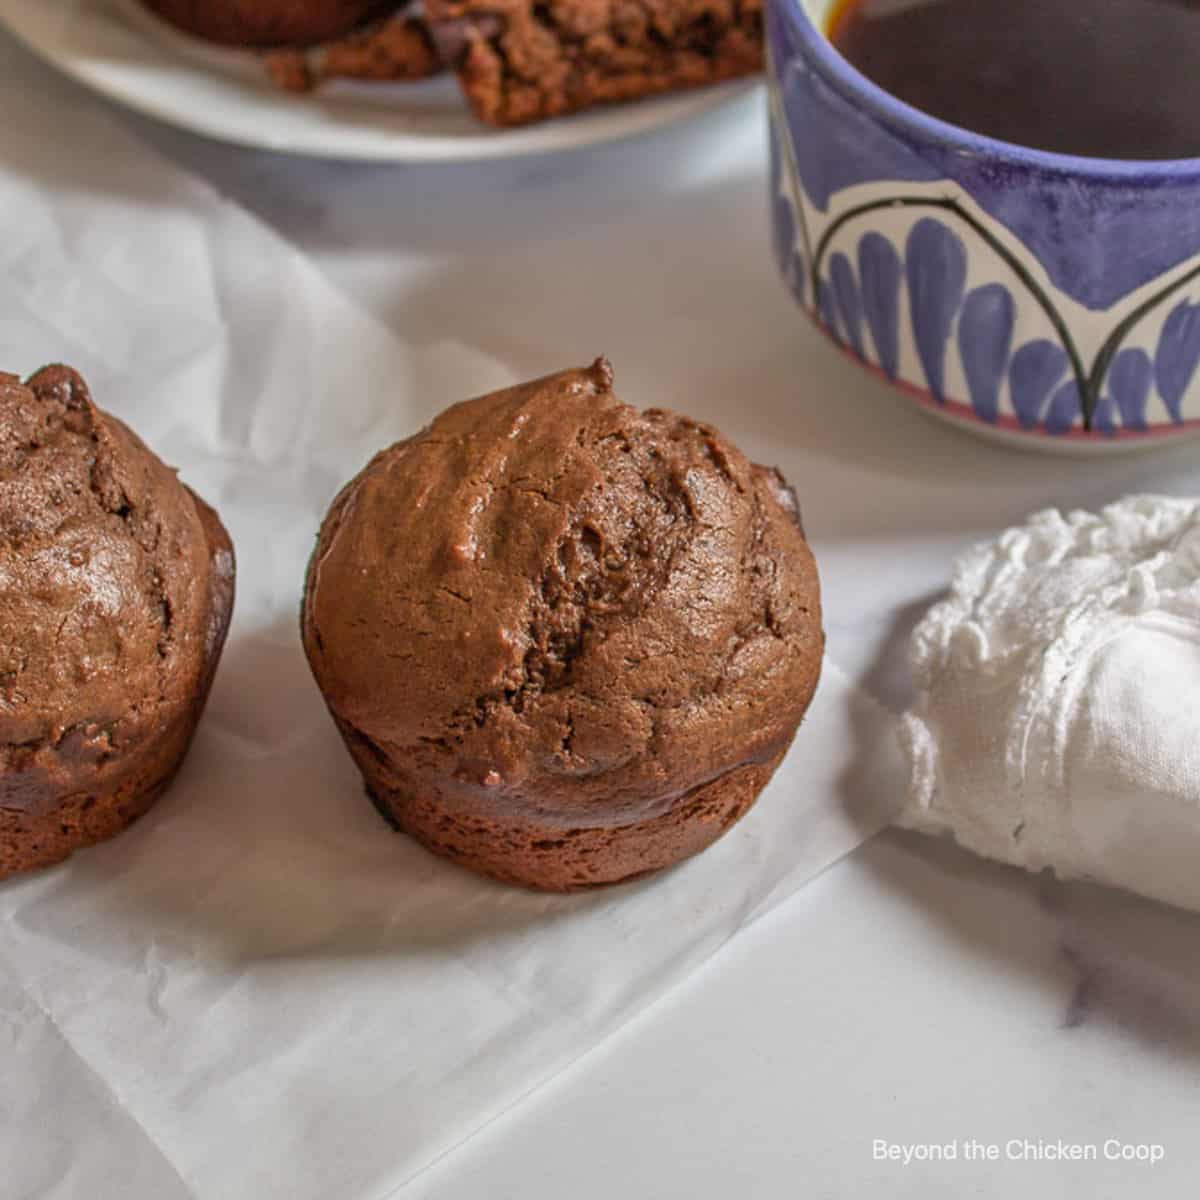 Chocolate muffins next to a cup of coffee.